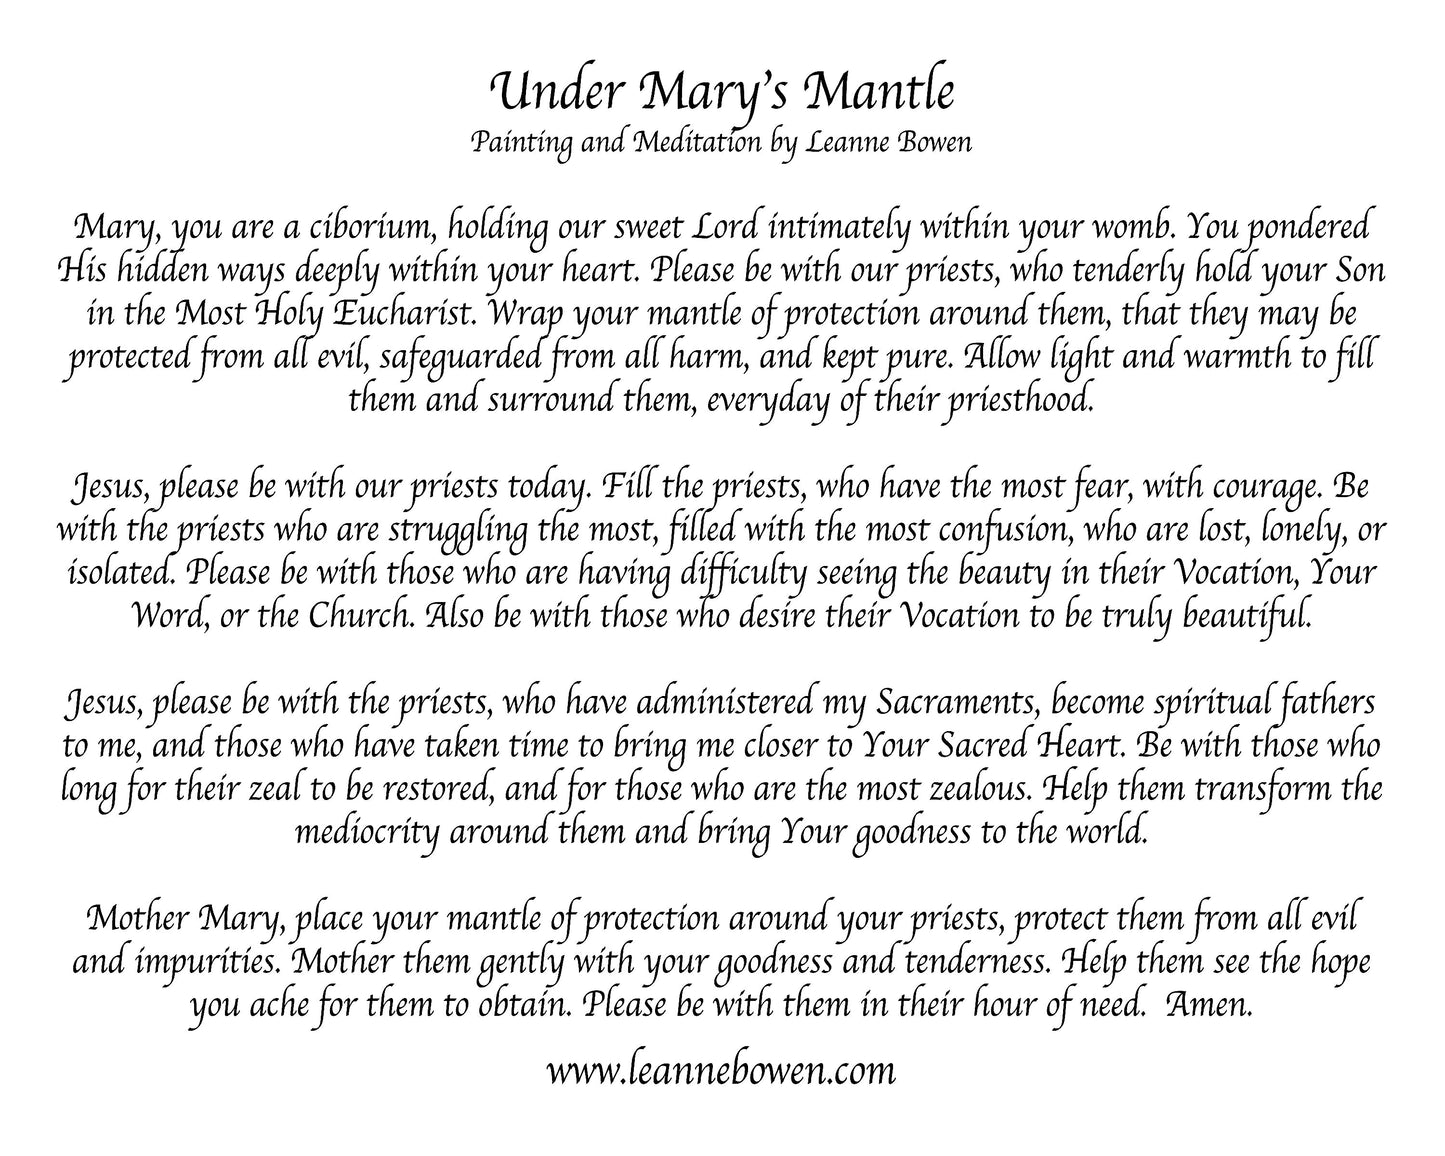 “Pray for Priests” Ministry- Under Mary's Mantle Extensive Digital Download